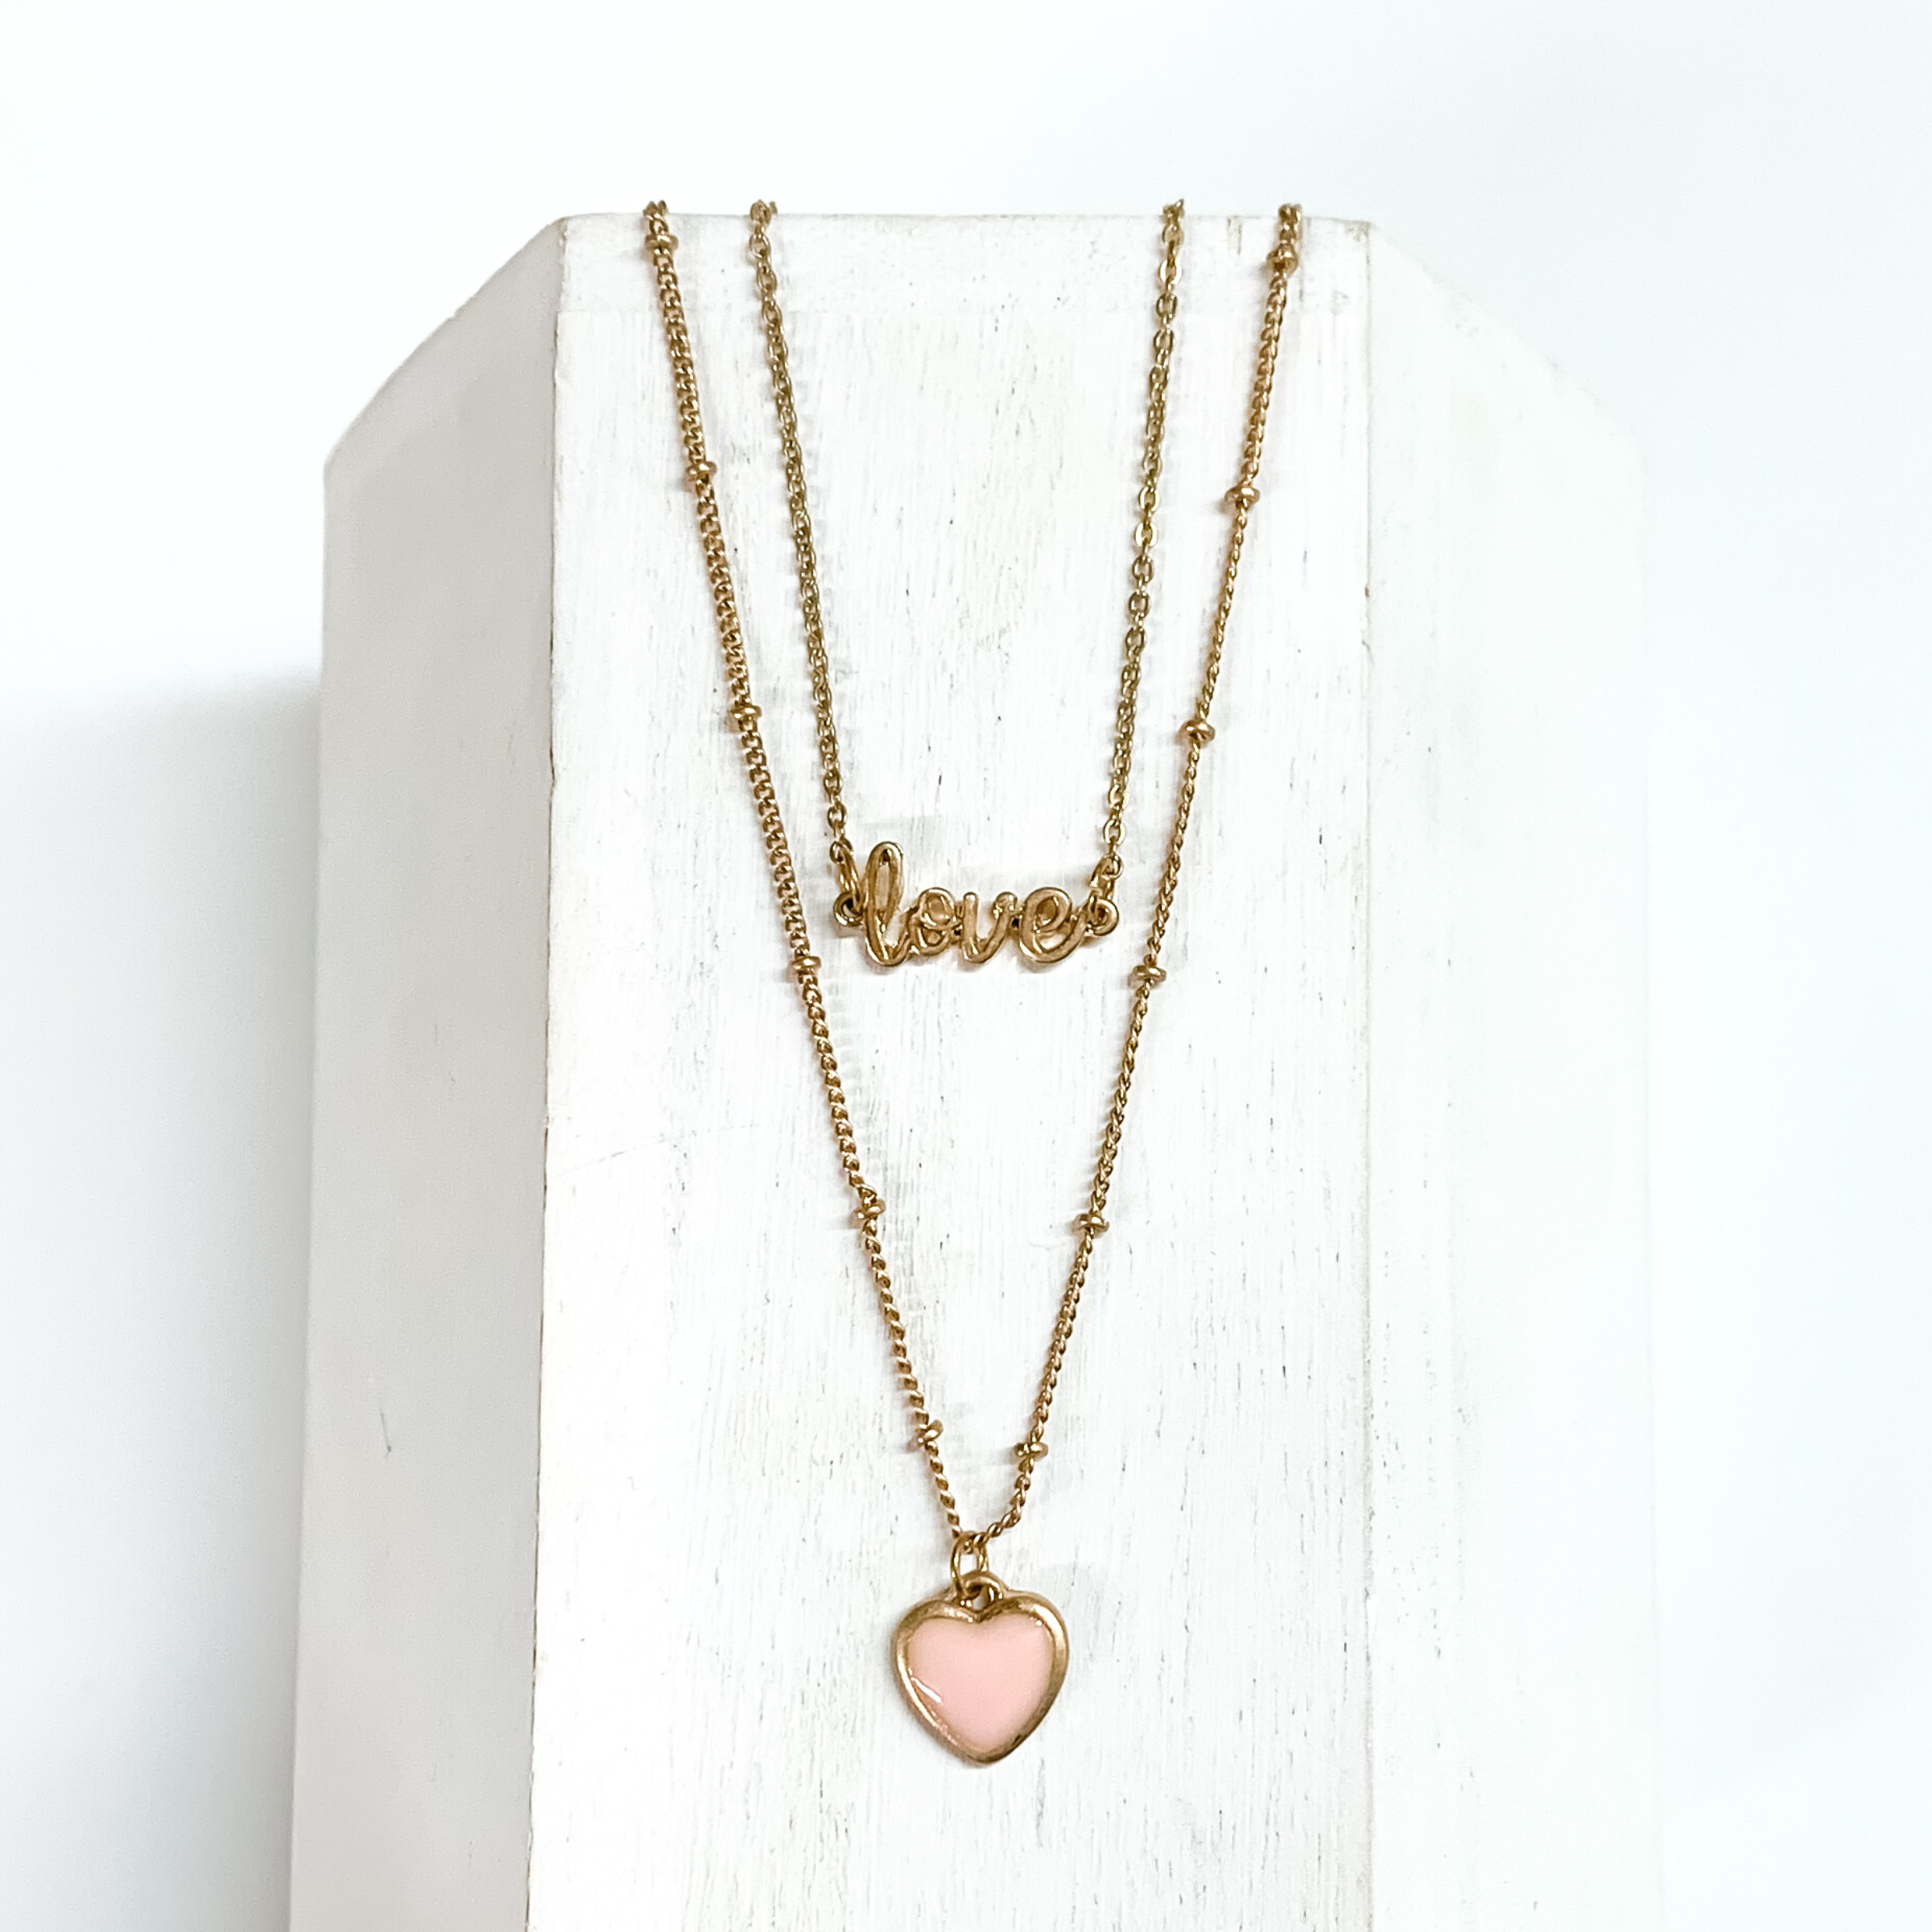 Two stranded gold chained necklace. The shorter strand has a gold pendant that spells out "LOVE" and the longer strand has a small pink heart charm. This necklace is pictured laying on a white block on a white background.